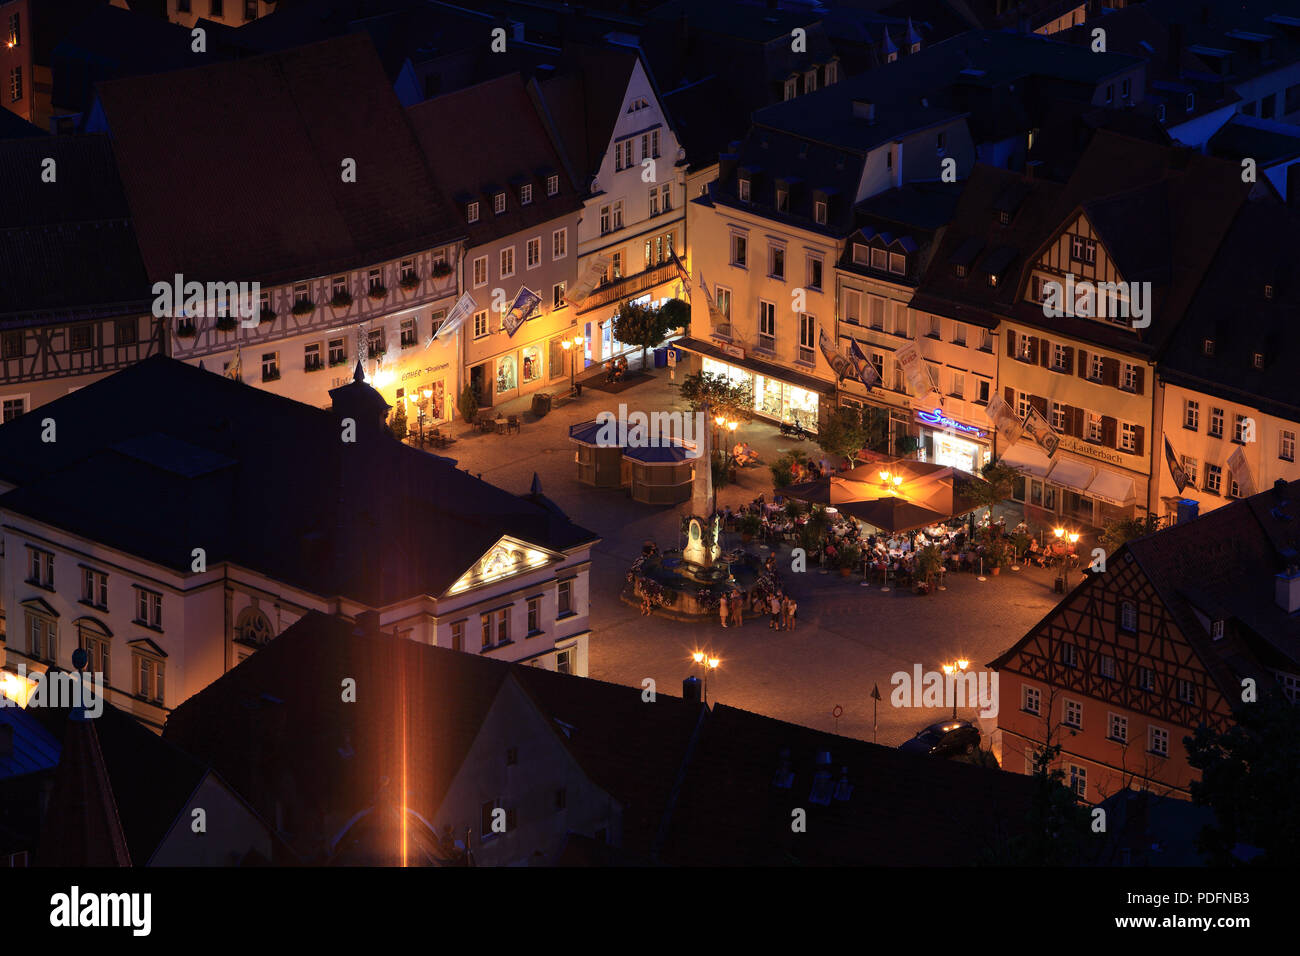 Market square in the evening, Kulmbach, Upper Franconia, Bavaria, Germany Stock Photo